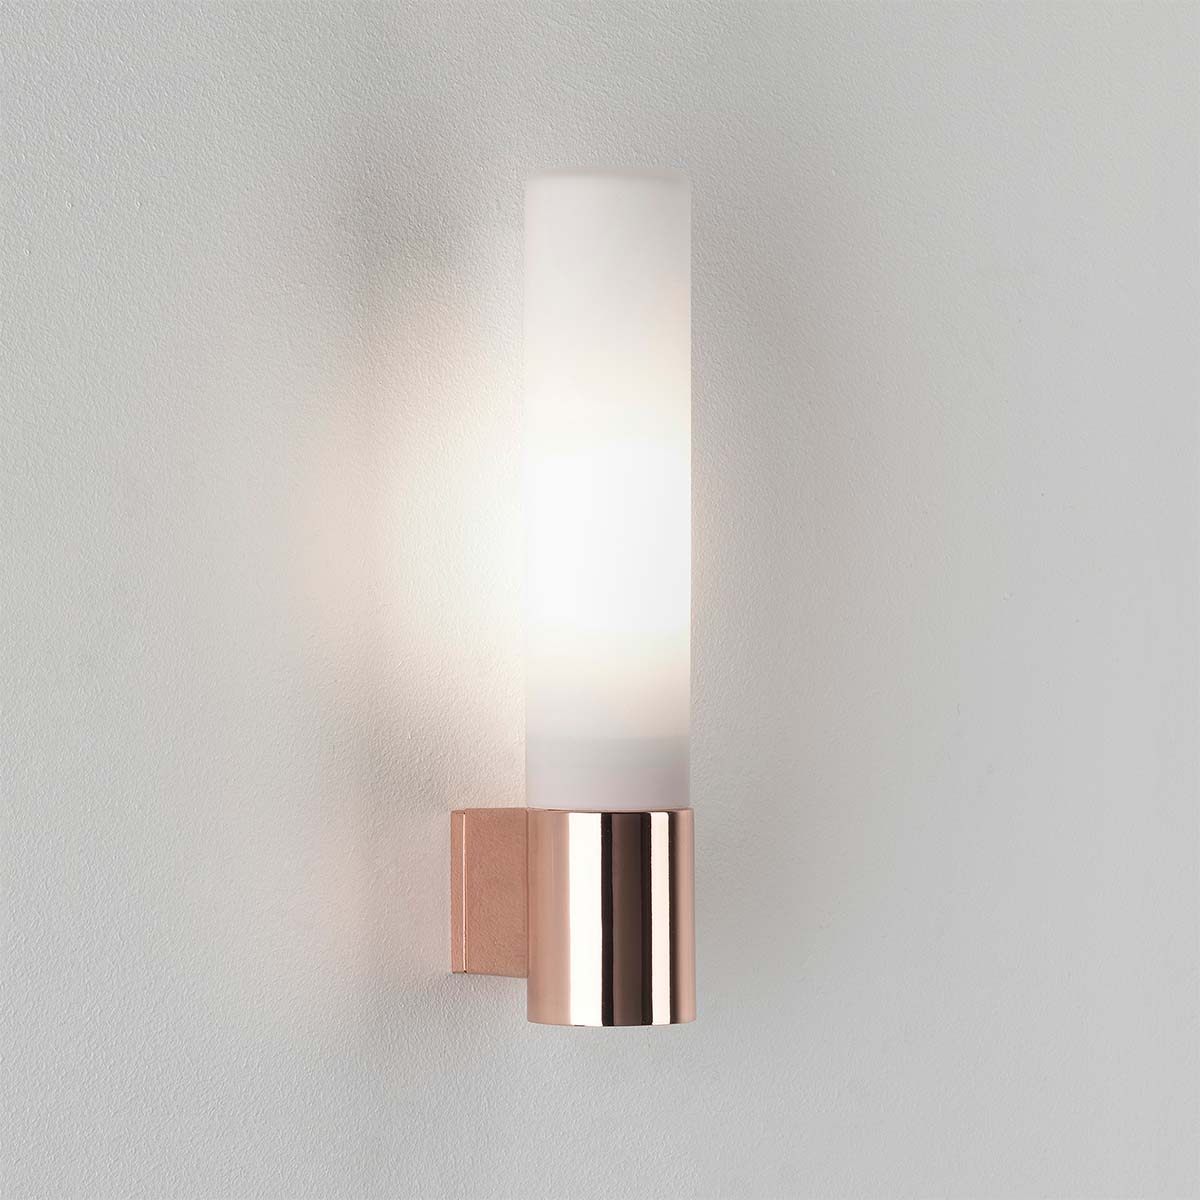 Siena Bathroom Light with Glass Tube Shade Polished Copper